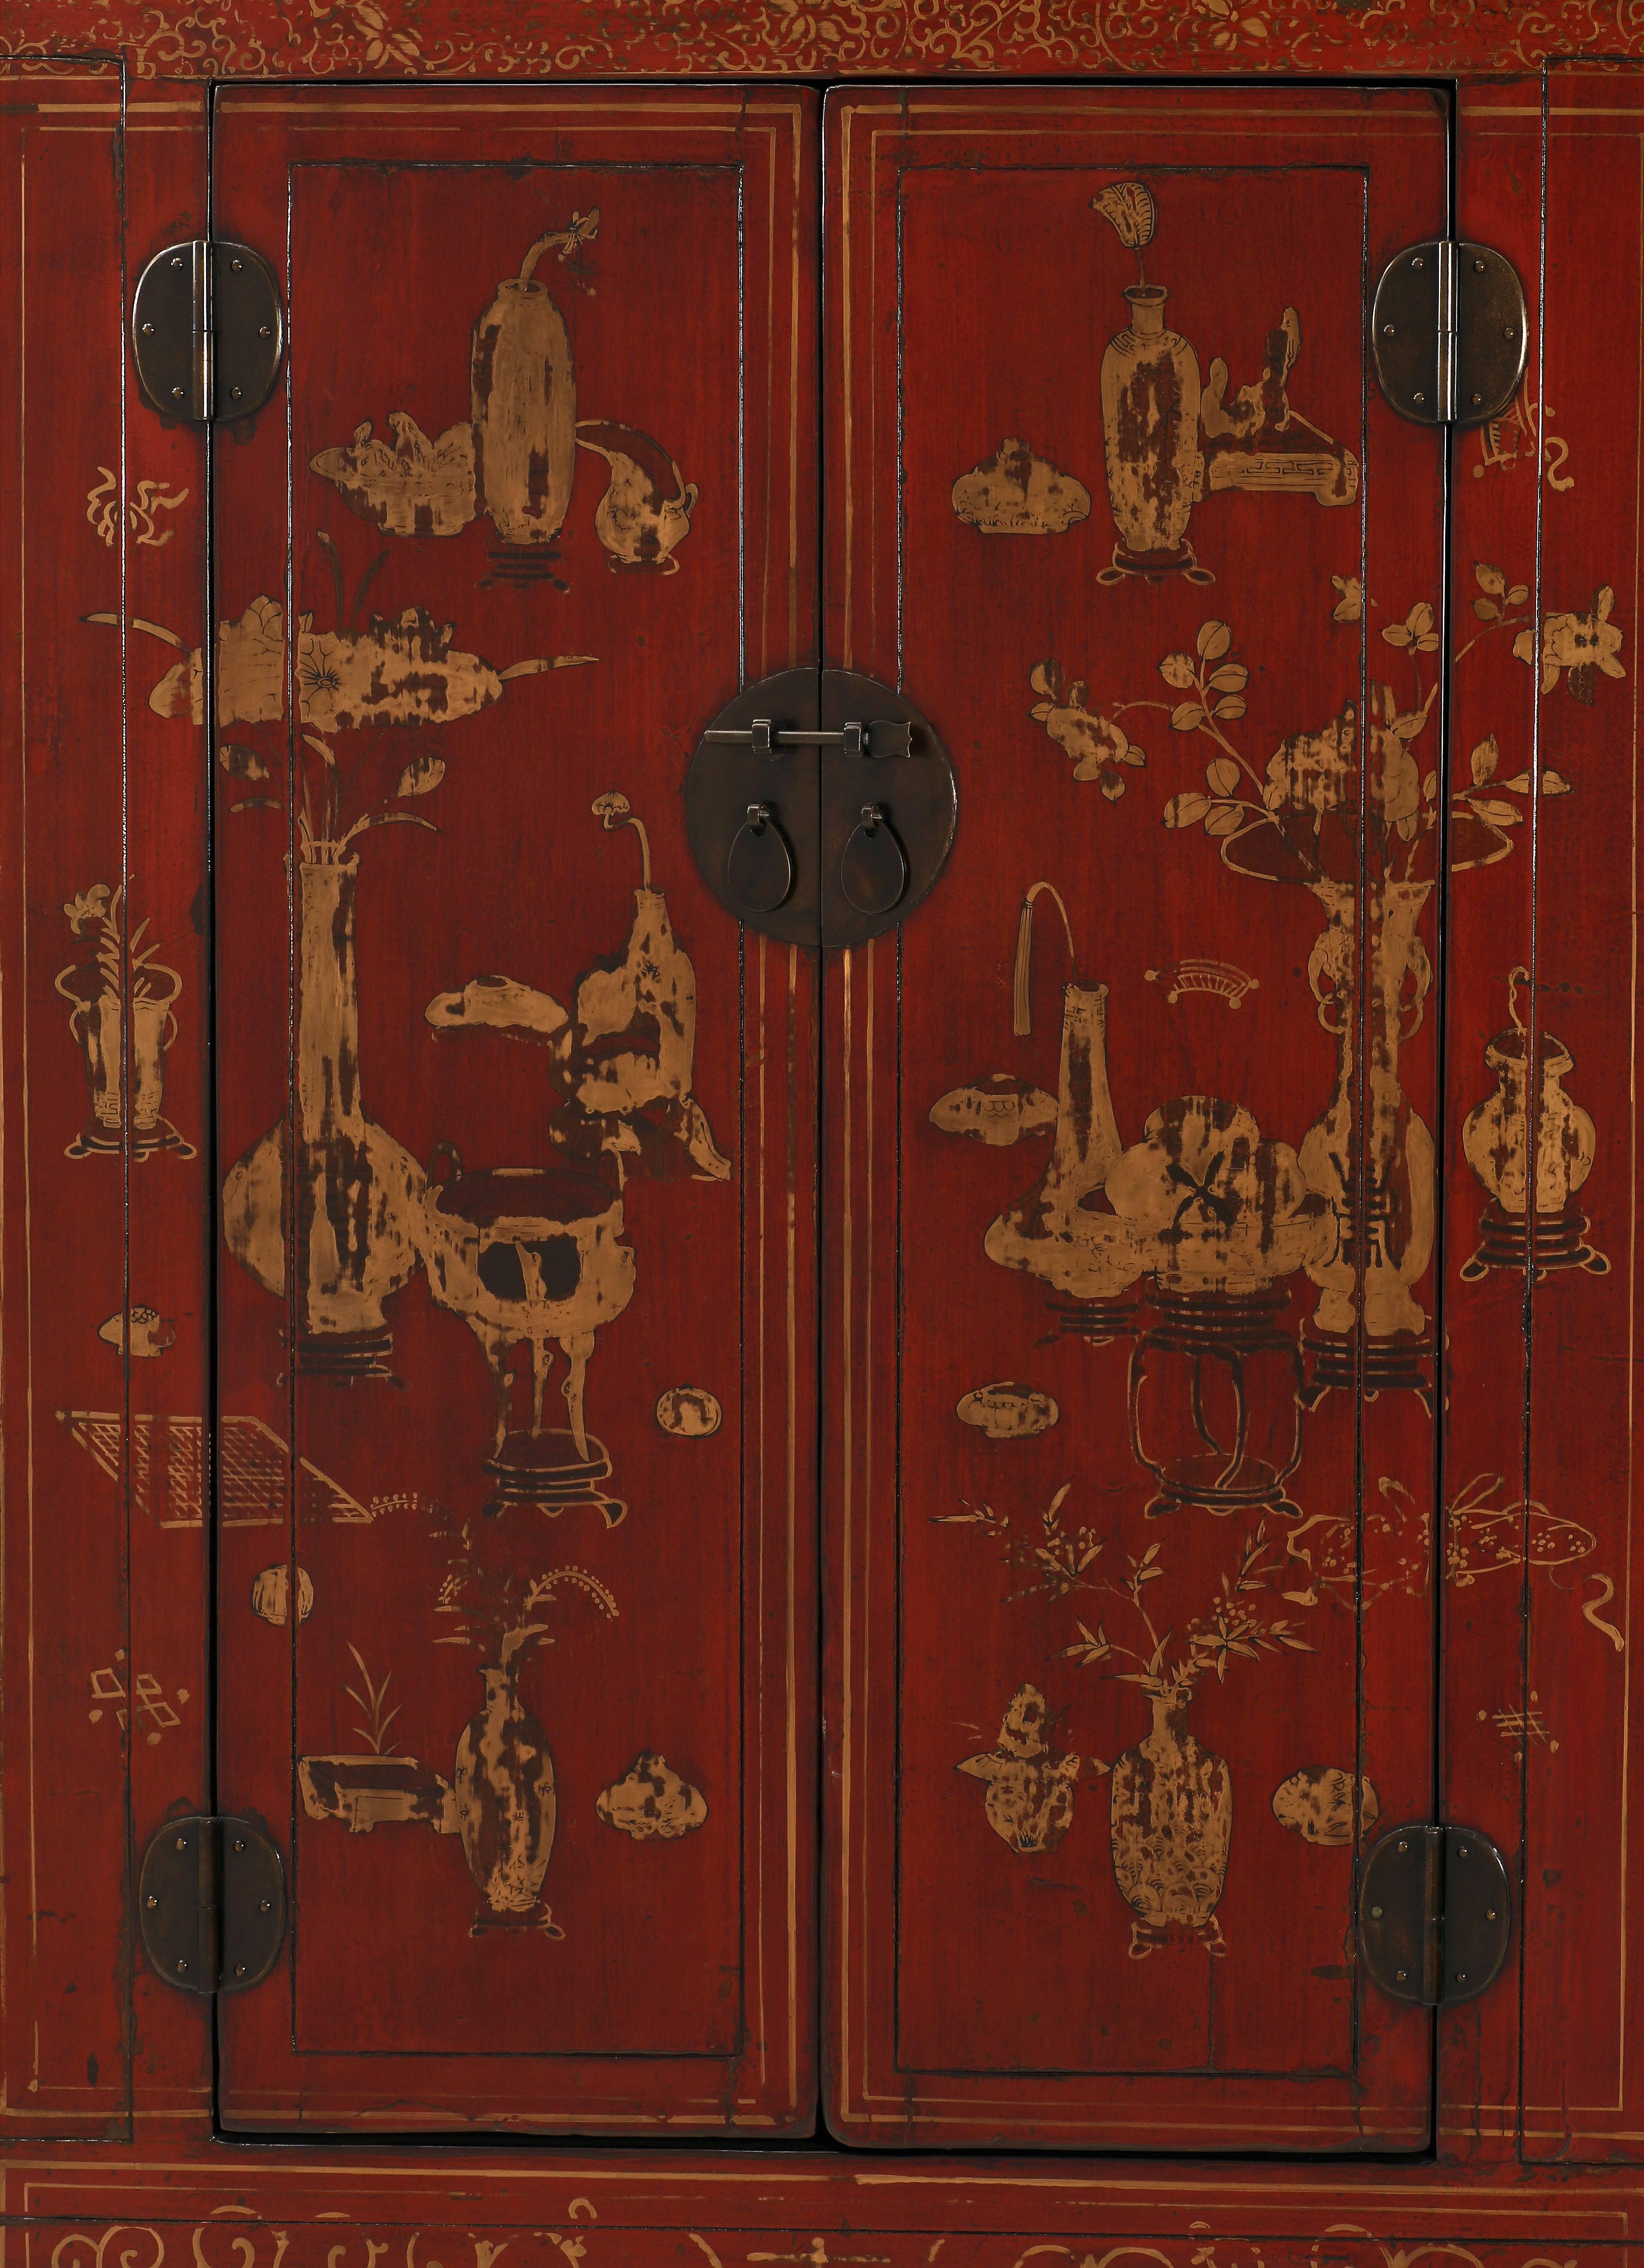 Hand-Crafted Antique Red Lacquer Gilt Painted Chinese Compound Cabinet, Scholastic Art